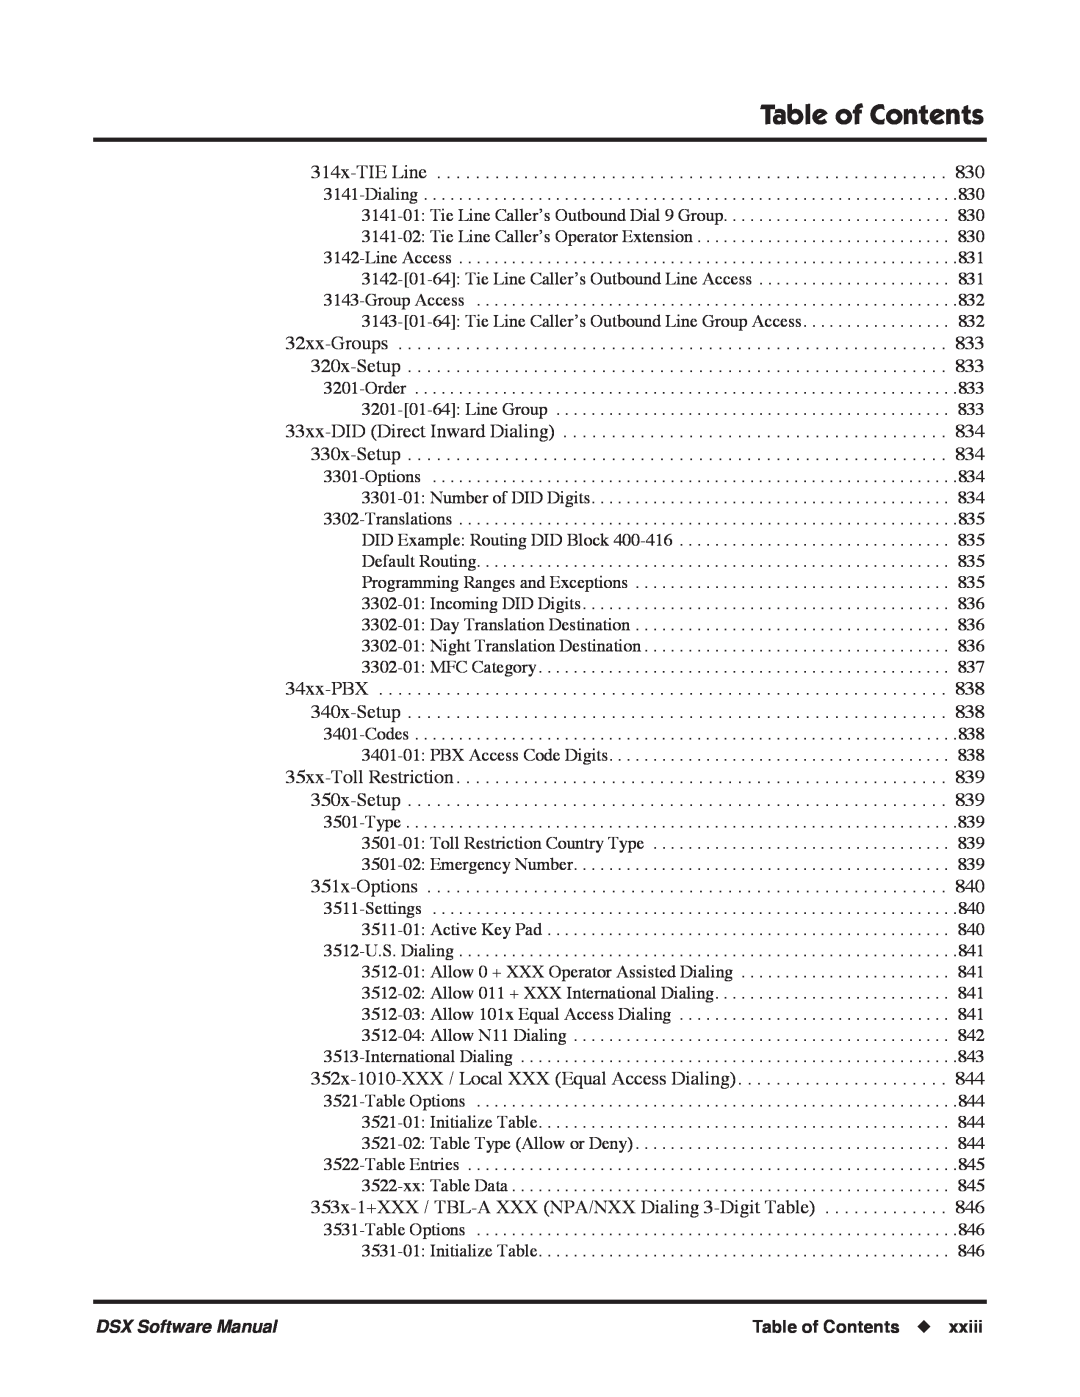 NEC P, N 1093100 software manual Table of Contents, 314x-TIELine 